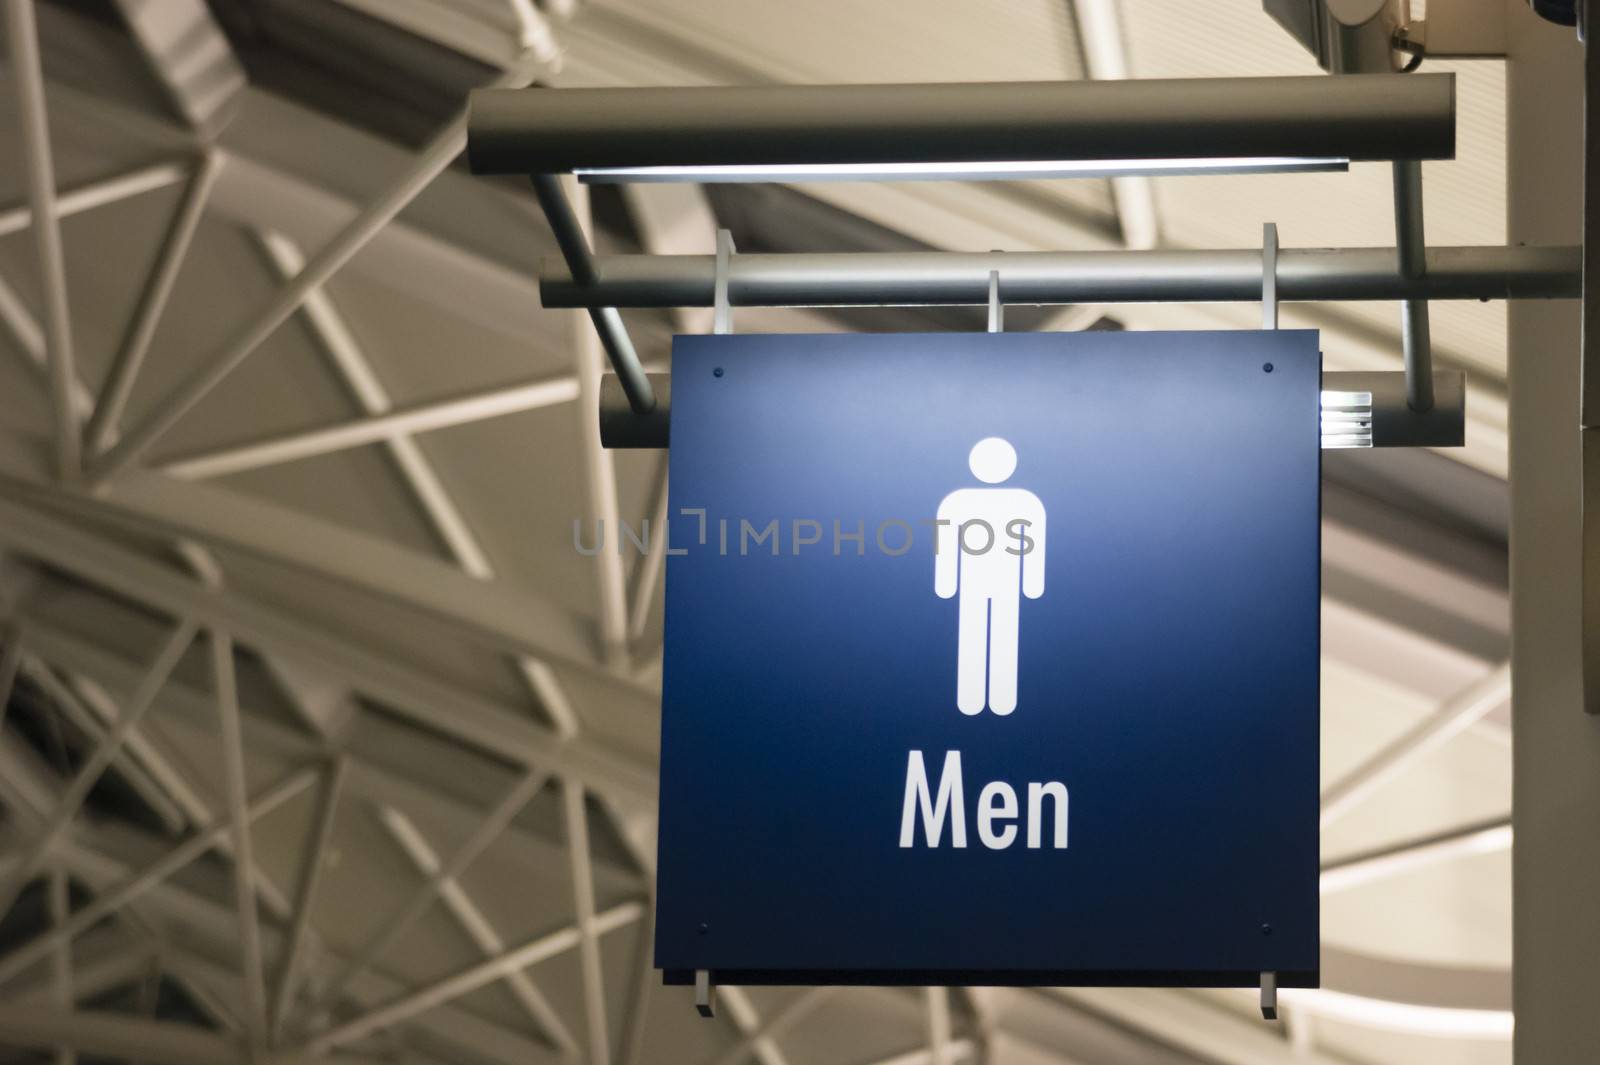 Men's Restroom Male Lavatory Sign Marker Public Building Architecture by ChrisBoswell